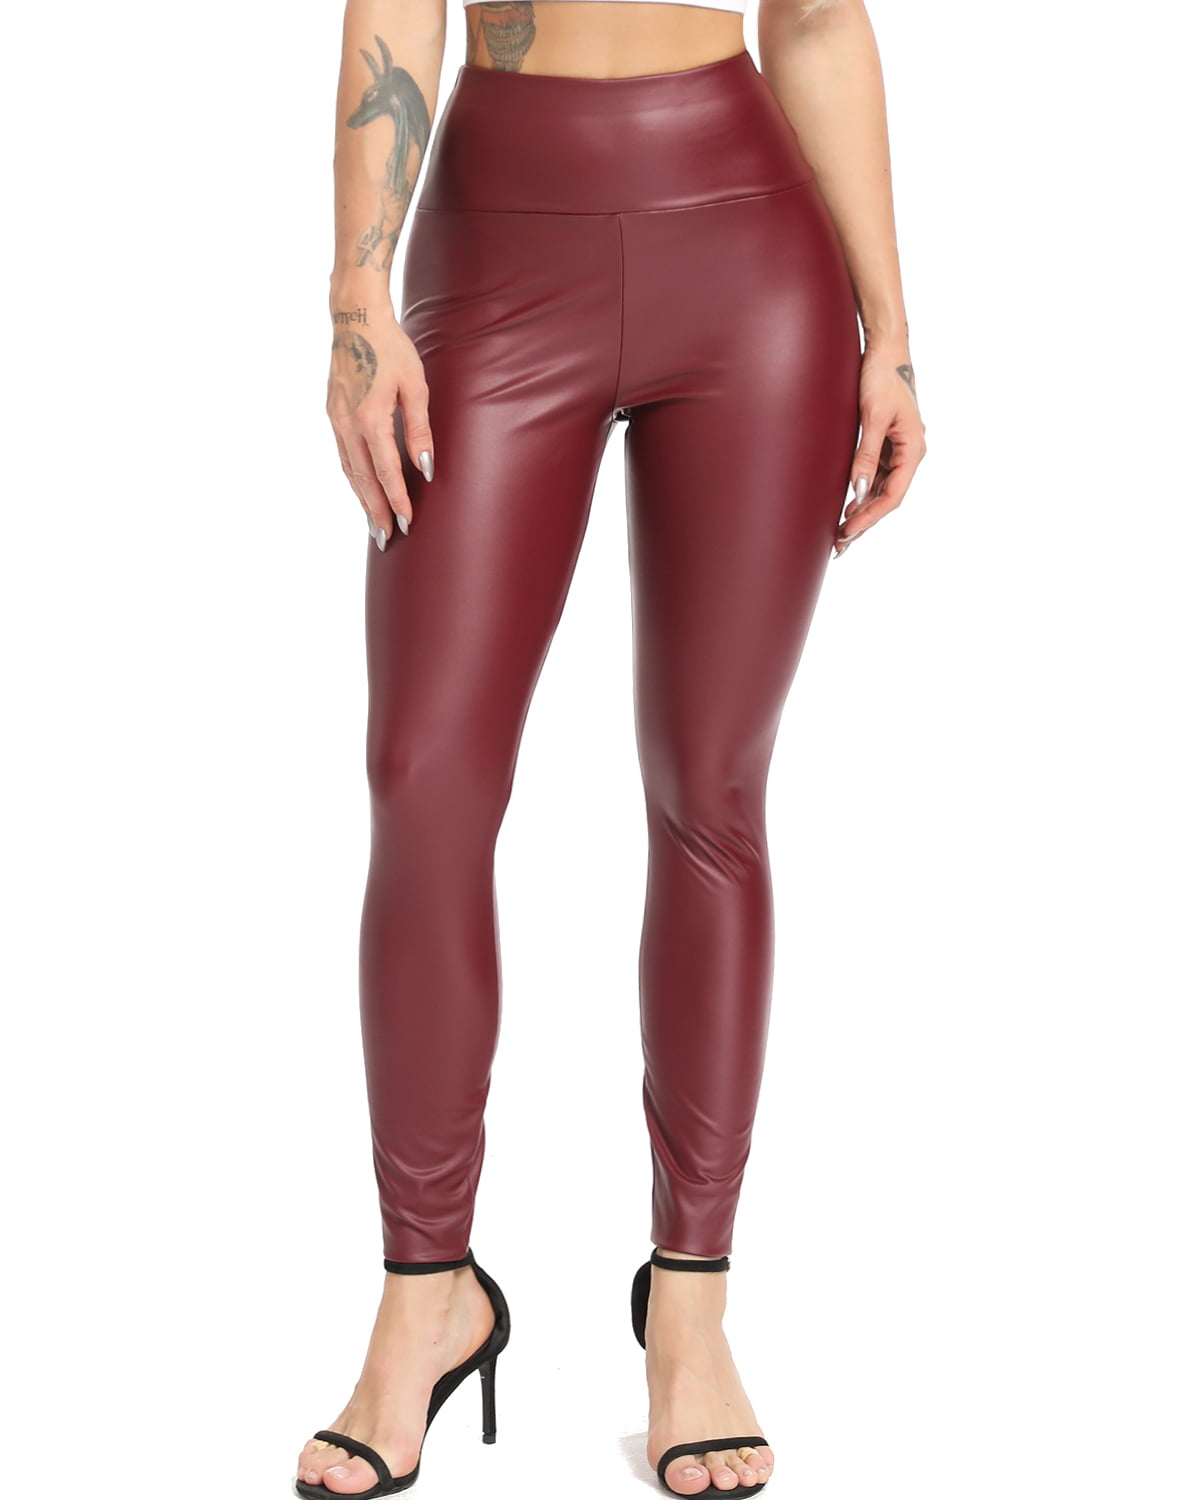 INFILAR Womens Faux Leather Pants High Waisted Tummy Control Sexy ...